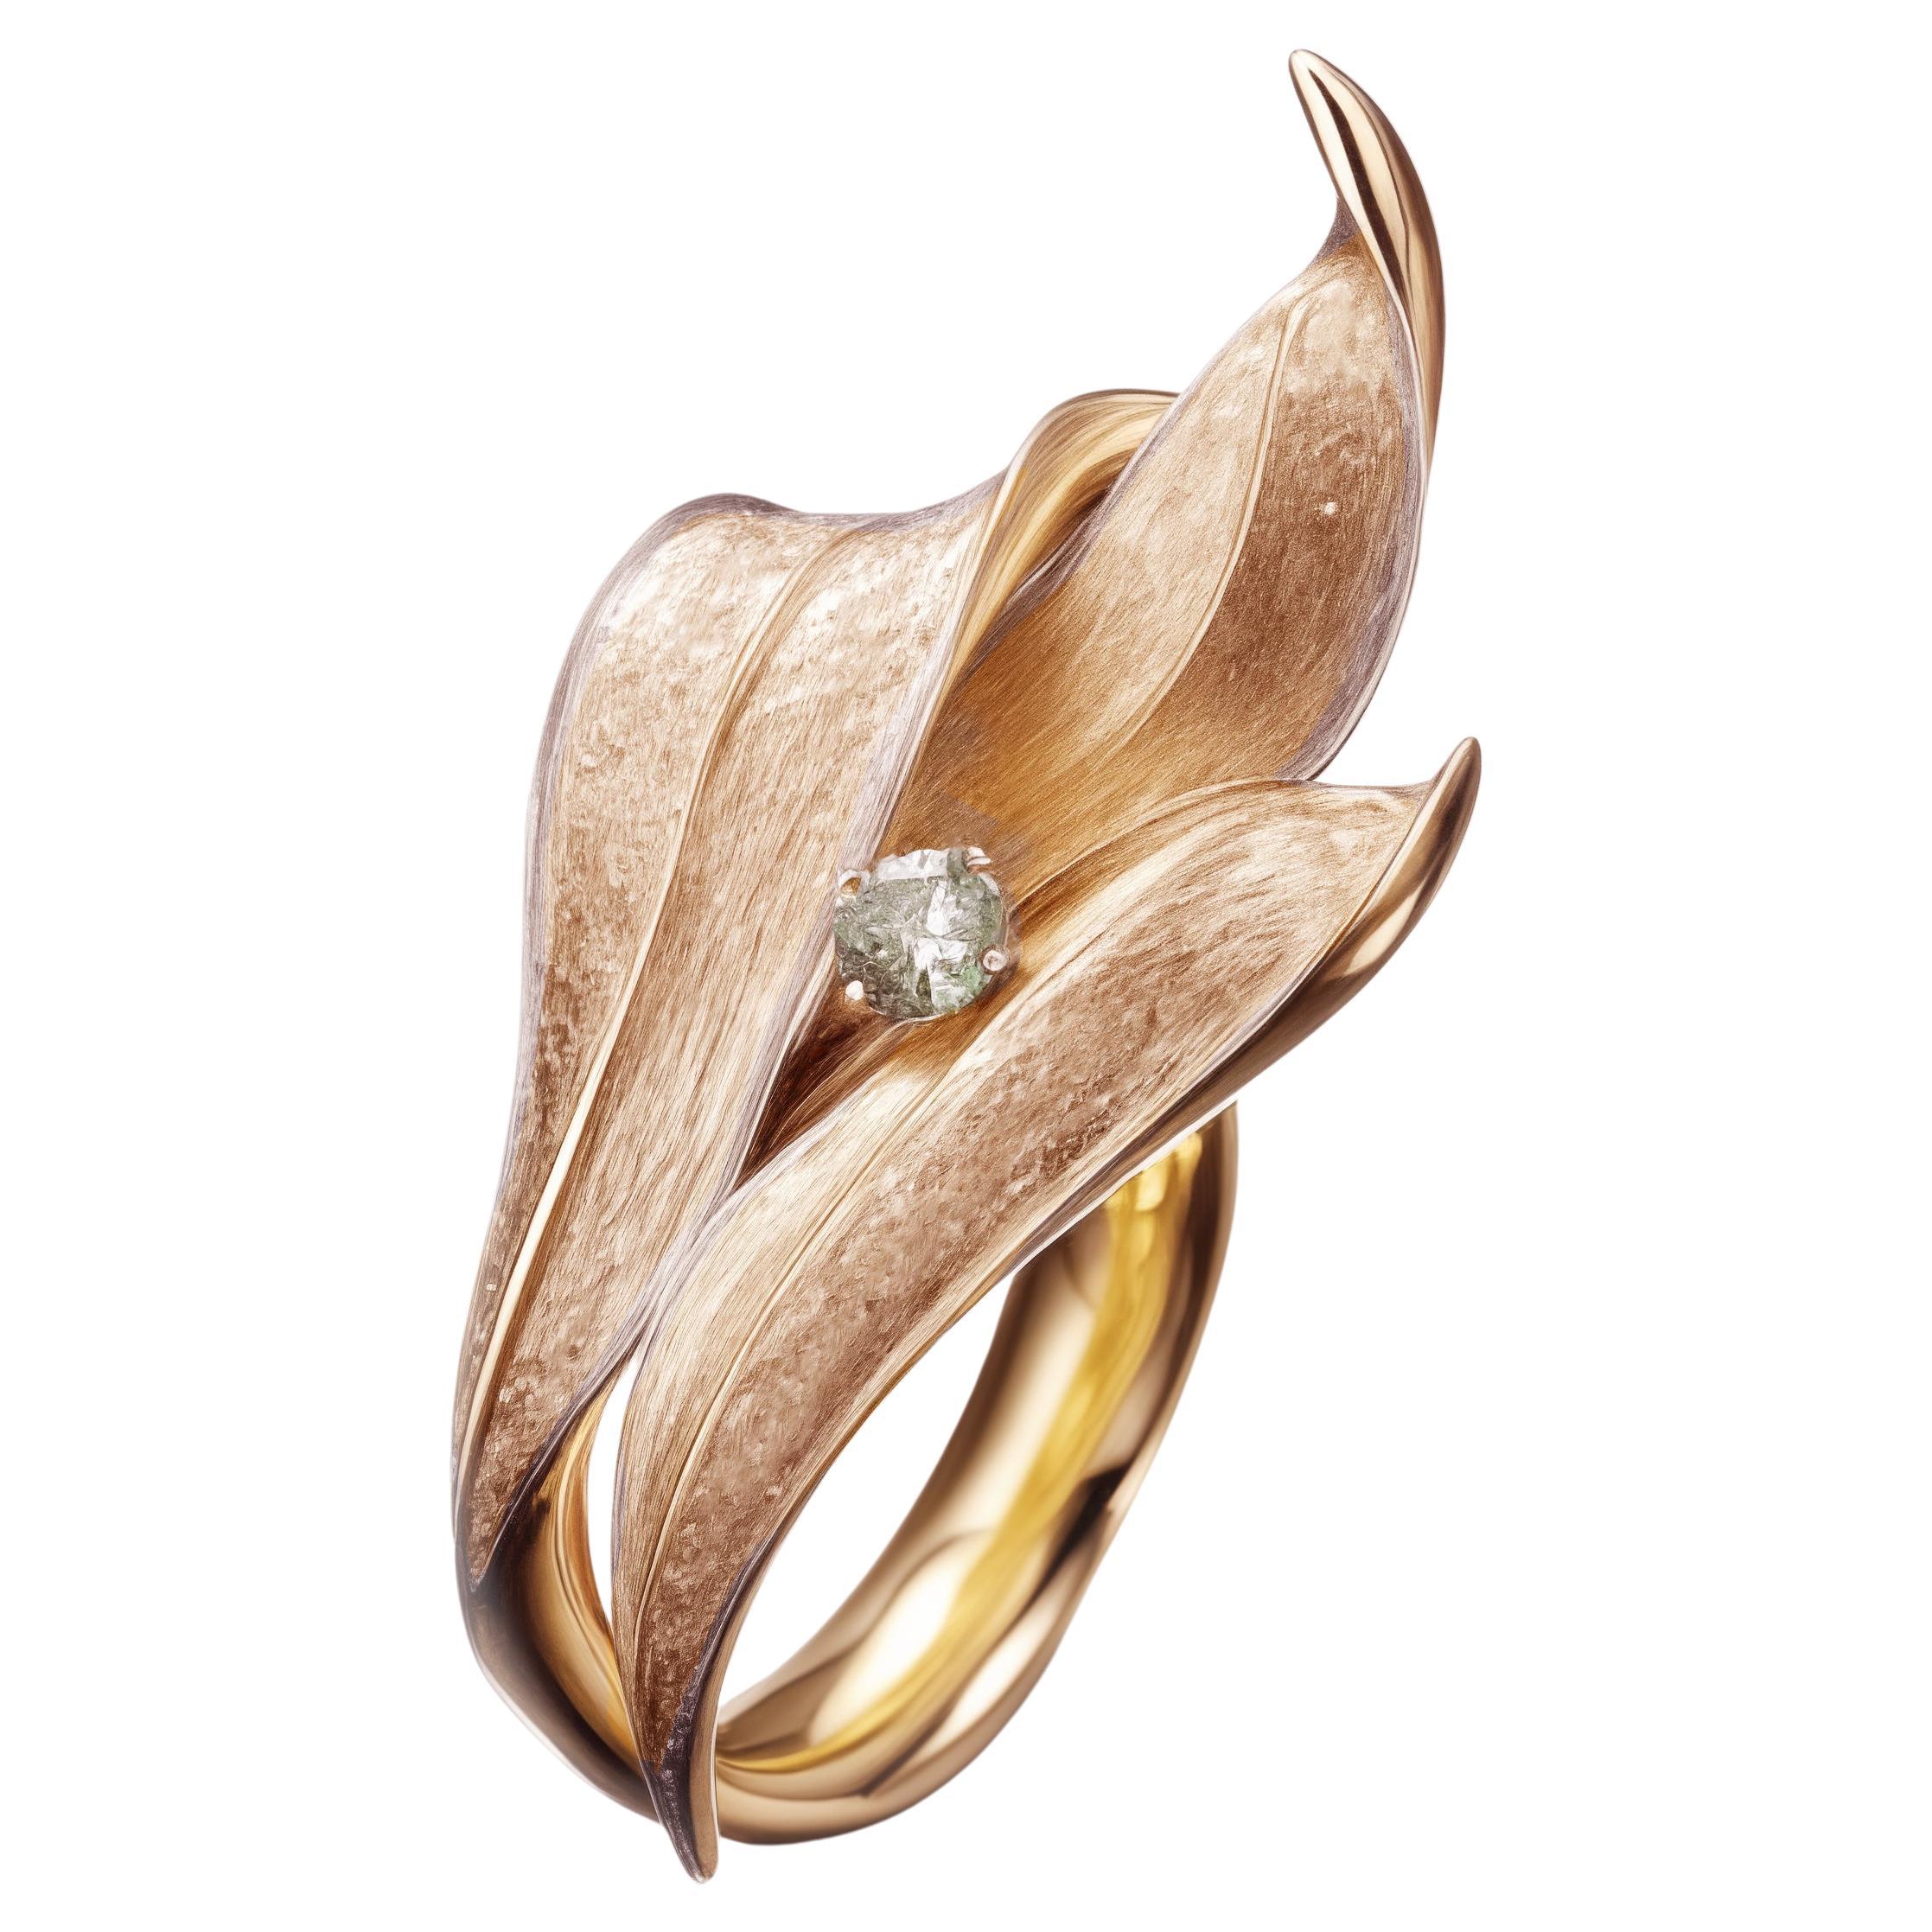 Eighteen Karat Rose Gold Contemporary Lily of The Valley Ring with Tourmaline